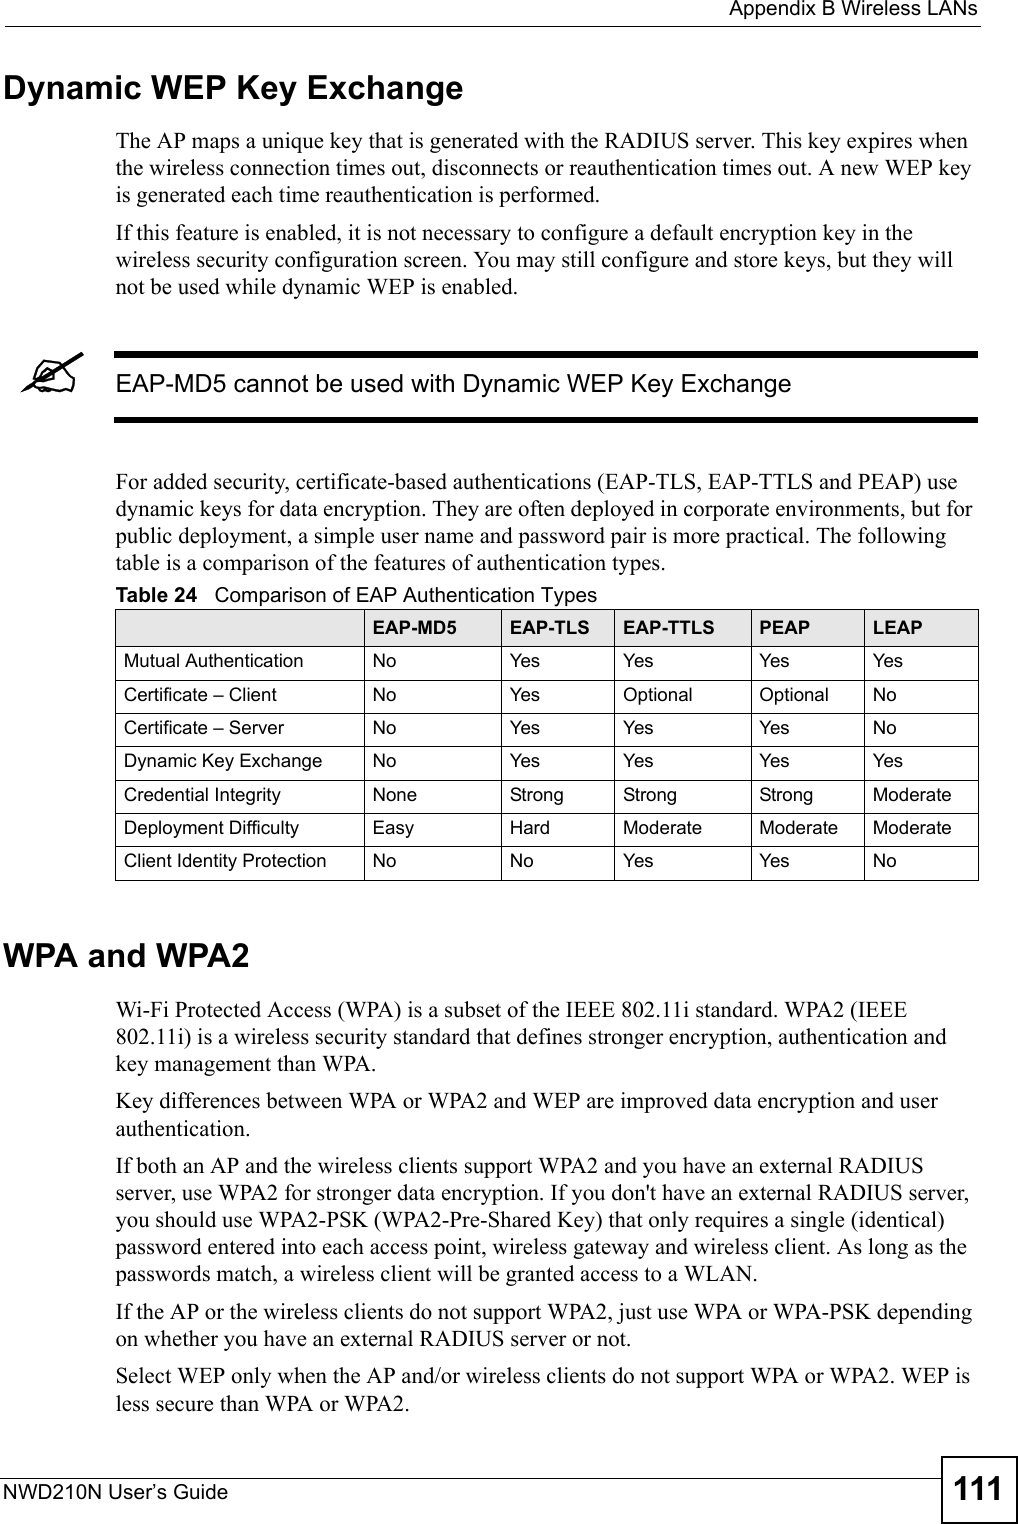  Appendix B Wireless LANsNWD210N User’s Guide 111Dynamic WEP Key ExchangeThe AP maps a unique key that is generated with the RADIUS server. This key expires when the wireless connection times out, disconnects or reauthentication times out. A new WEP key is generated each time reauthentication is performed.If this feature is enabled, it is not necessary to configure a default encryption key in the wireless security configuration screen. You may still configure and store keys, but they will not be used while dynamic WEP is enabled.&quot;EAP-MD5 cannot be used with Dynamic WEP Key ExchangeFor added security, certificate-based authentications (EAP-TLS, EAP-TTLS and PEAP) use dynamic keys for data encryption. They are often deployed in corporate environments, but for public deployment, a simple user name and password pair is more practical. The following table is a comparison of the features of authentication types.WPA and WPA2Wi-Fi Protected Access (WPA) is a subset of the IEEE 802.11i standard. WPA2 (IEEE 802.11i) is a wireless security standard that defines stronger encryption, authentication and key management than WPA. Key differences between WPA or WPA2 and WEP are improved data encryption and user authentication.If both an AP and the wireless clients support WPA2 and you have an external RADIUS server, use WPA2 for stronger data encryption. If you don&apos;t have an external RADIUS server, you should use WPA2-PSK (WPA2-Pre-Shared Key) that only requires a single (identical) password entered into each access point, wireless gateway and wireless client. As long as the passwords match, a wireless client will be granted access to a WLAN. If the AP or the wireless clients do not support WPA2, just use WPA or WPA-PSK depending on whether you have an external RADIUS server or not.Select WEP only when the AP and/or wireless clients do not support WPA or WPA2. WEP is less secure than WPA or WPA2.Table 24   Comparison of EAP Authentication TypesEAP-MD5 EAP-TLS EAP-TTLS PEAP LEAPMutual Authentication No Yes Yes Yes YesCertificate – Client No Yes Optional Optional NoCertificate – Server No Yes Yes Yes NoDynamic Key Exchange No Yes Yes Yes YesCredential Integrity None Strong Strong Strong ModerateDeployment Difficulty Easy Hard Moderate Moderate ModerateClient Identity Protection No No Yes Yes No